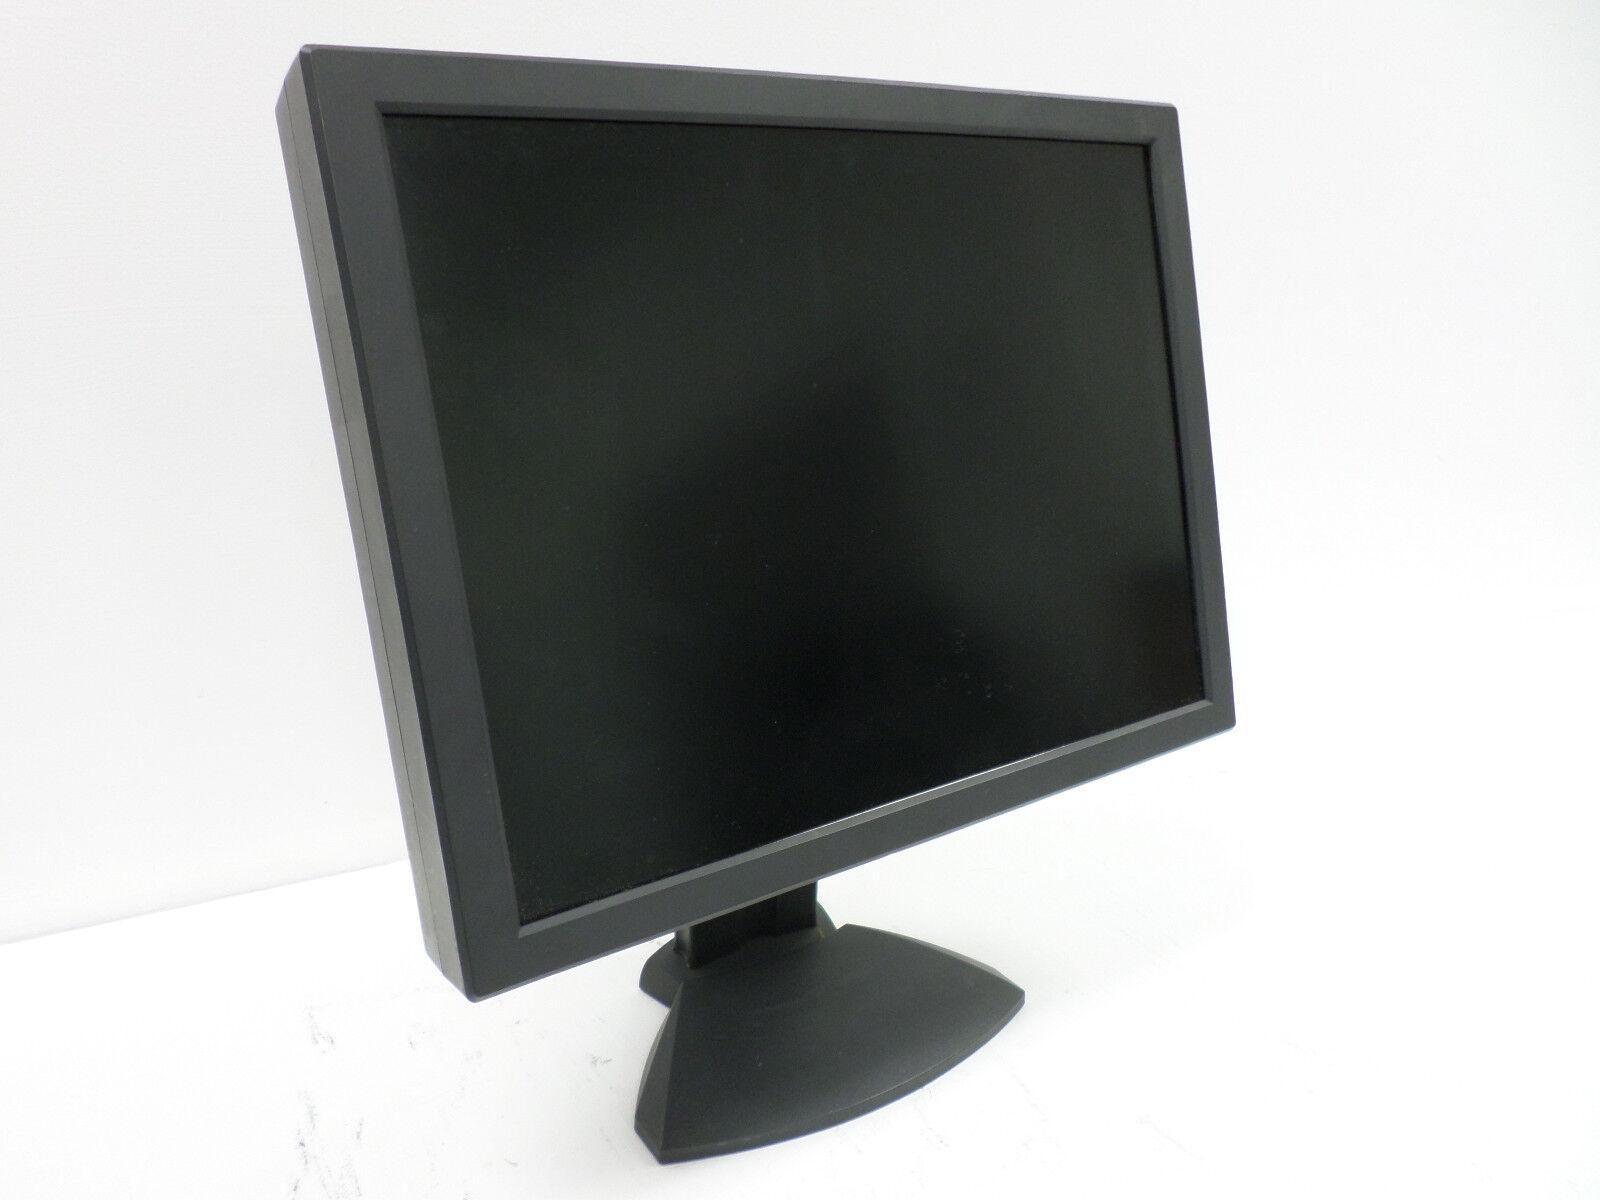 Image Systems PGL21 Grayscale Monitor for Radiology / Medical X-Ray FP2080GS-03